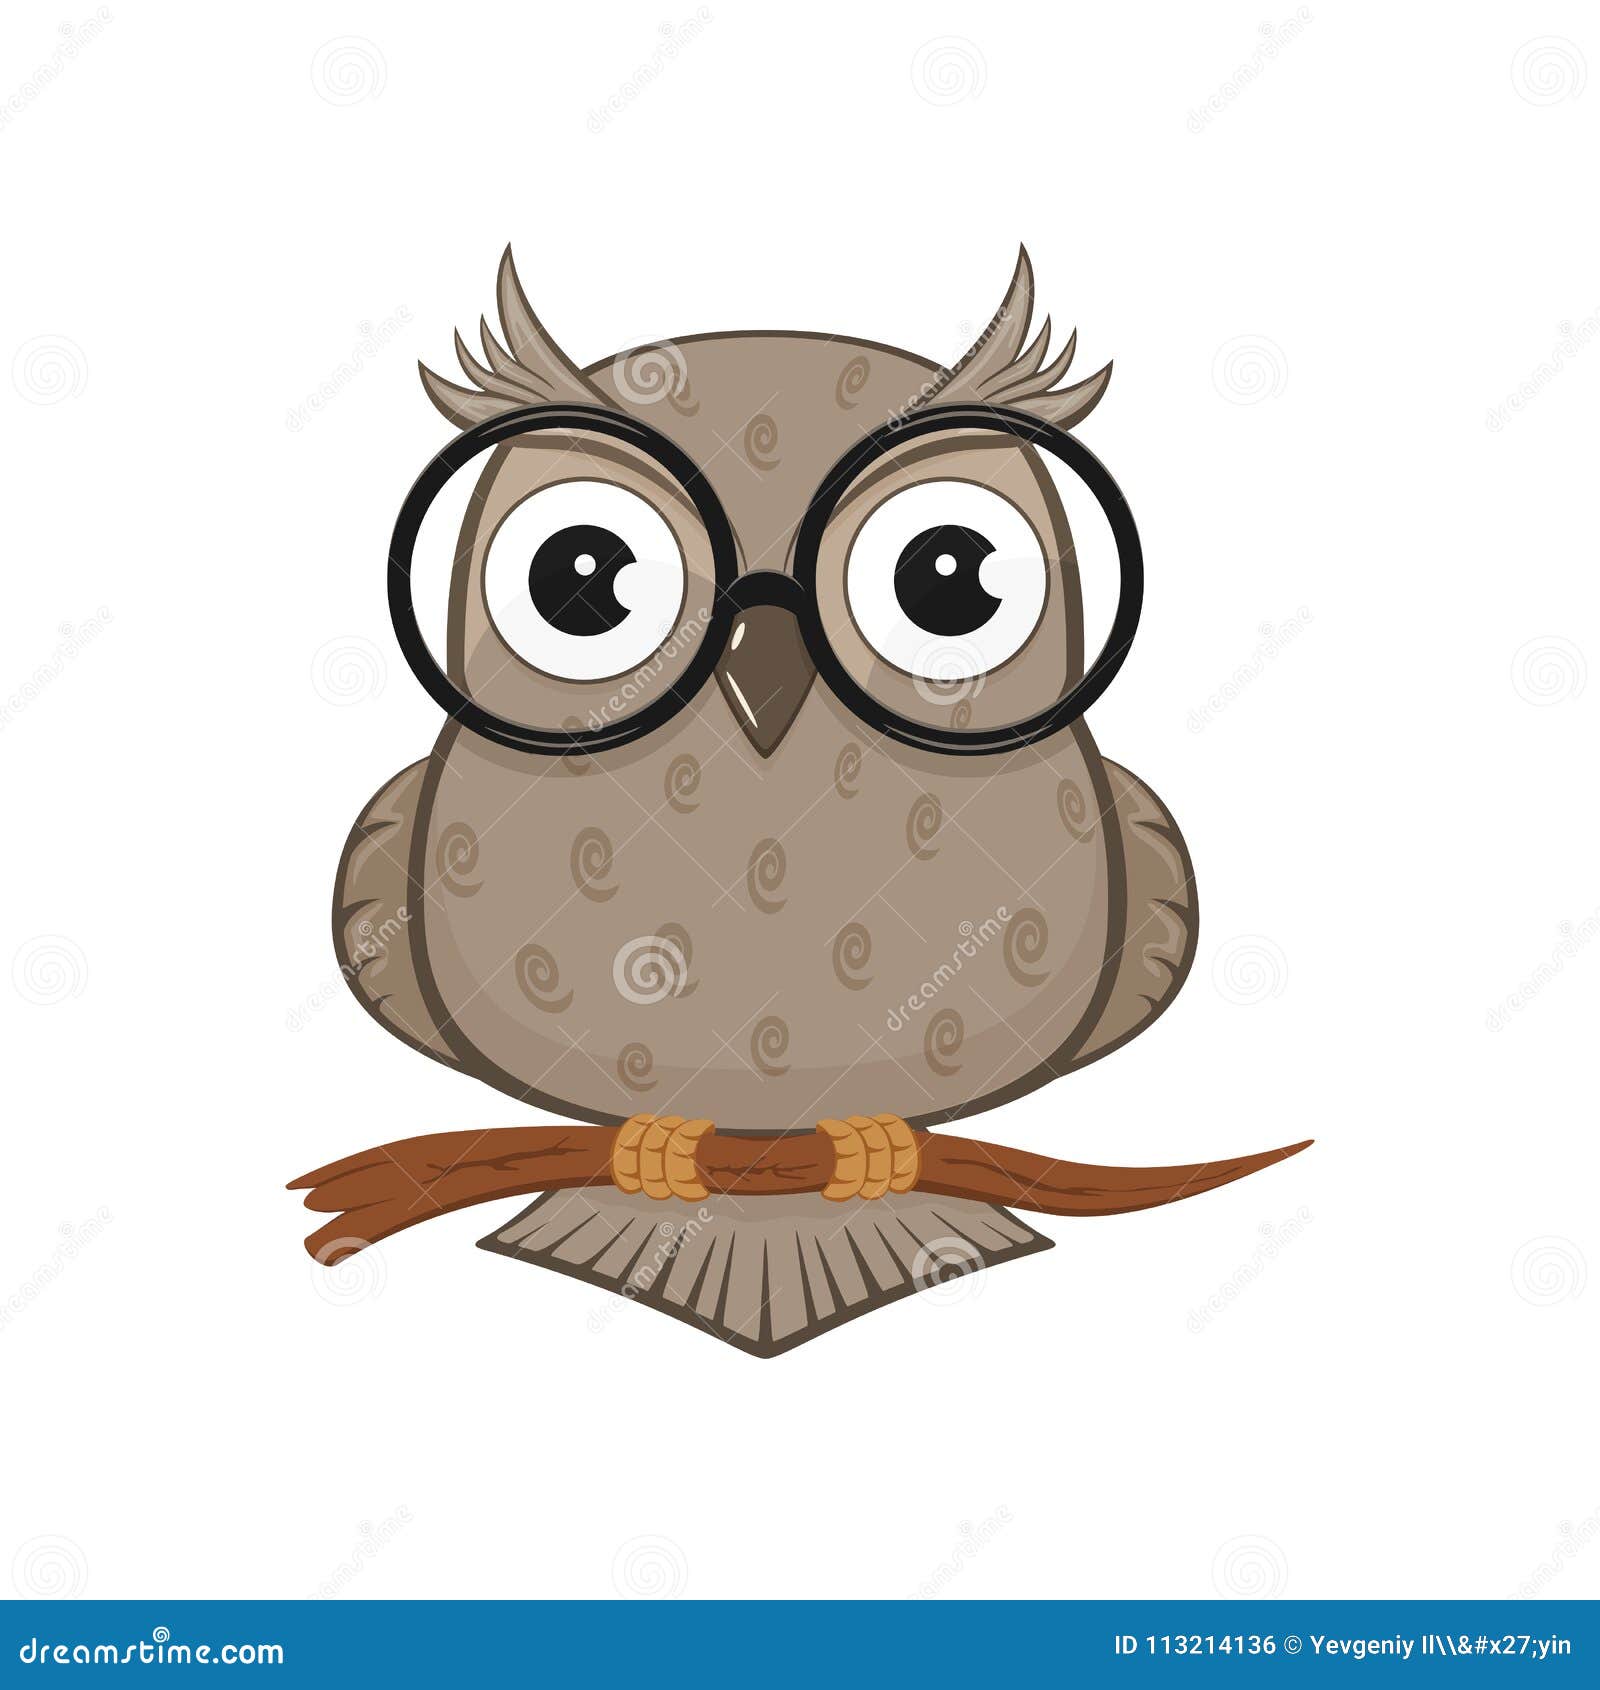 owl with glasses